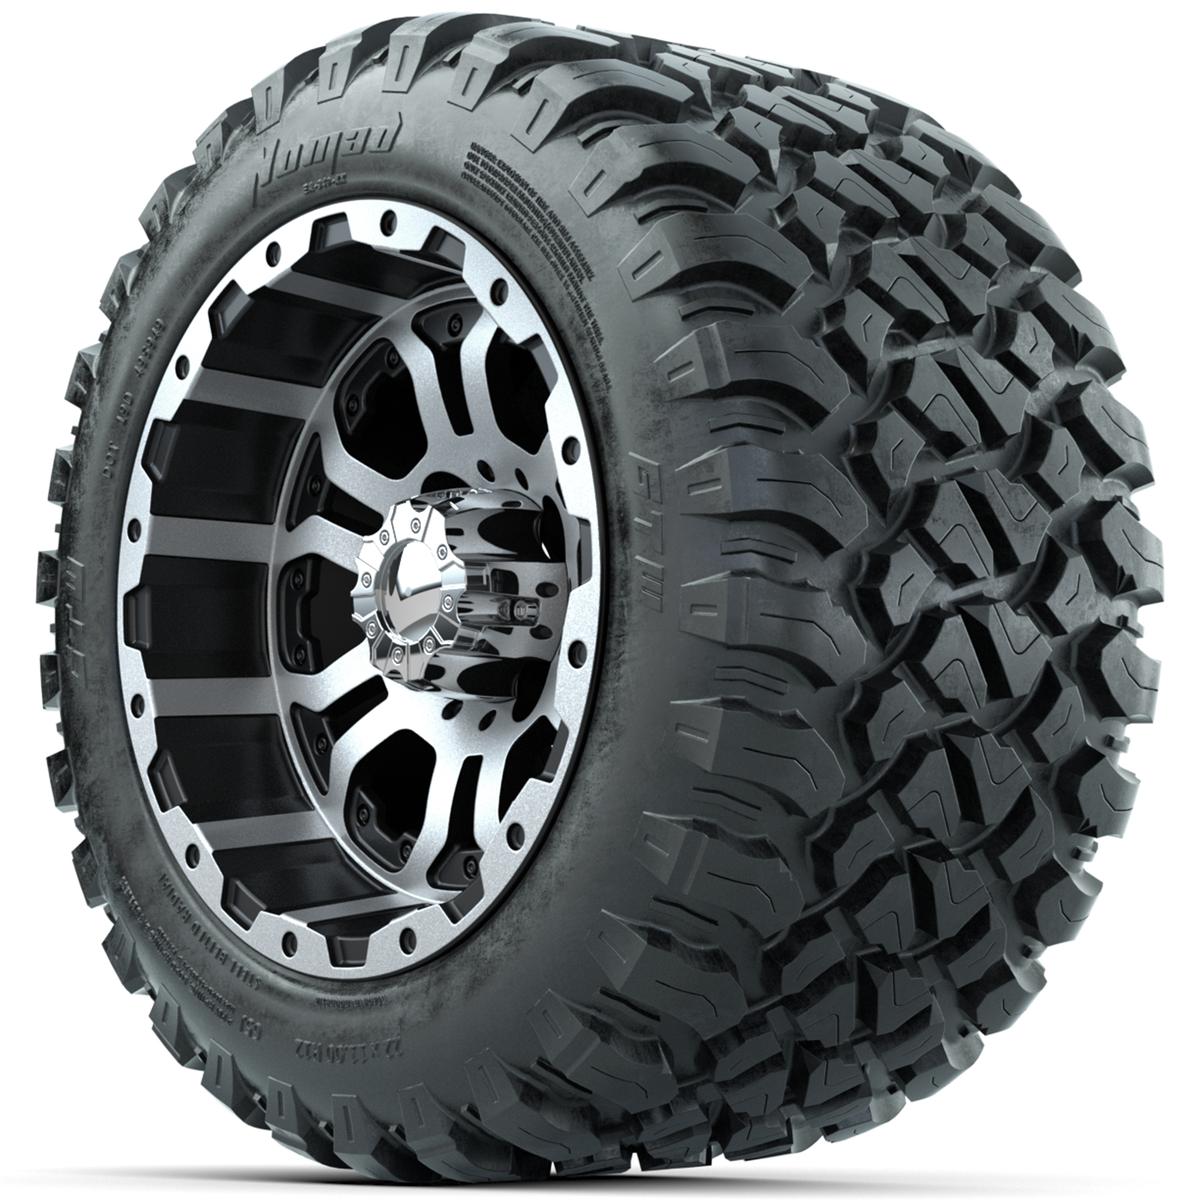 Set of (4) 12 in GTW Omega Wheels with 22x11-R12 GTW Nomad All-Terrain Tires